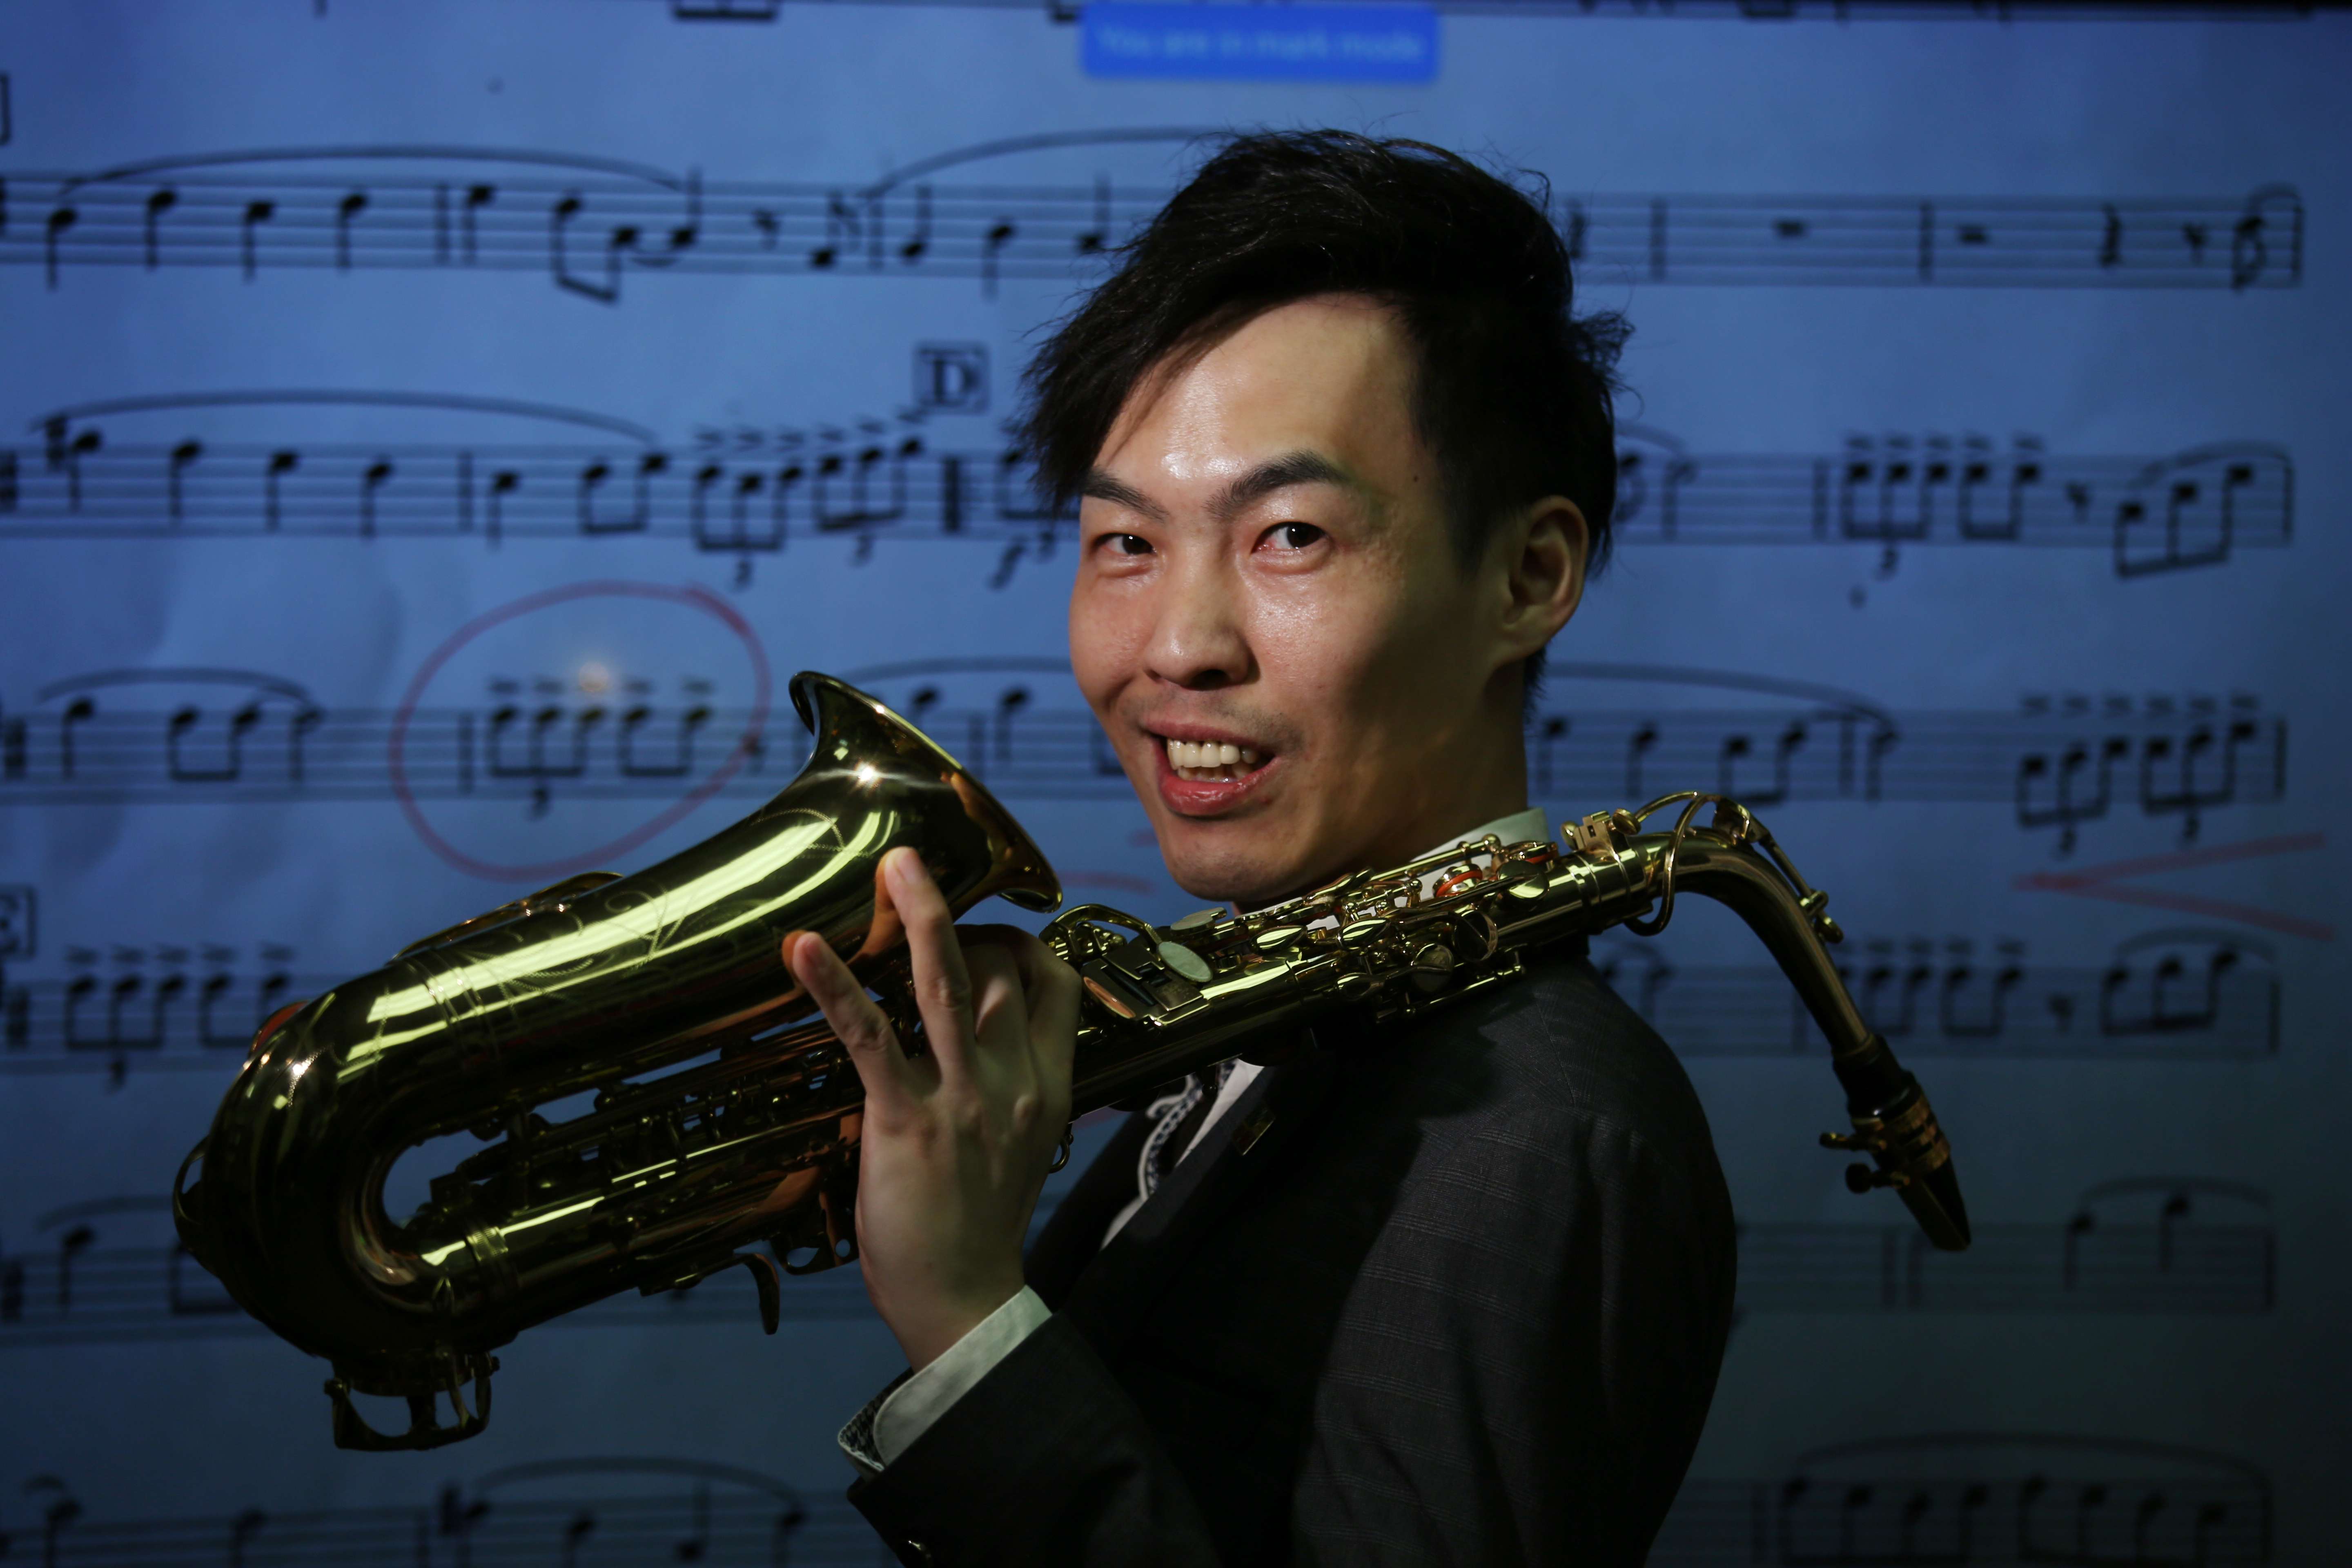 “I want all children to have equal access to music education,” says Jacky Ko. Photo: Nora Tam